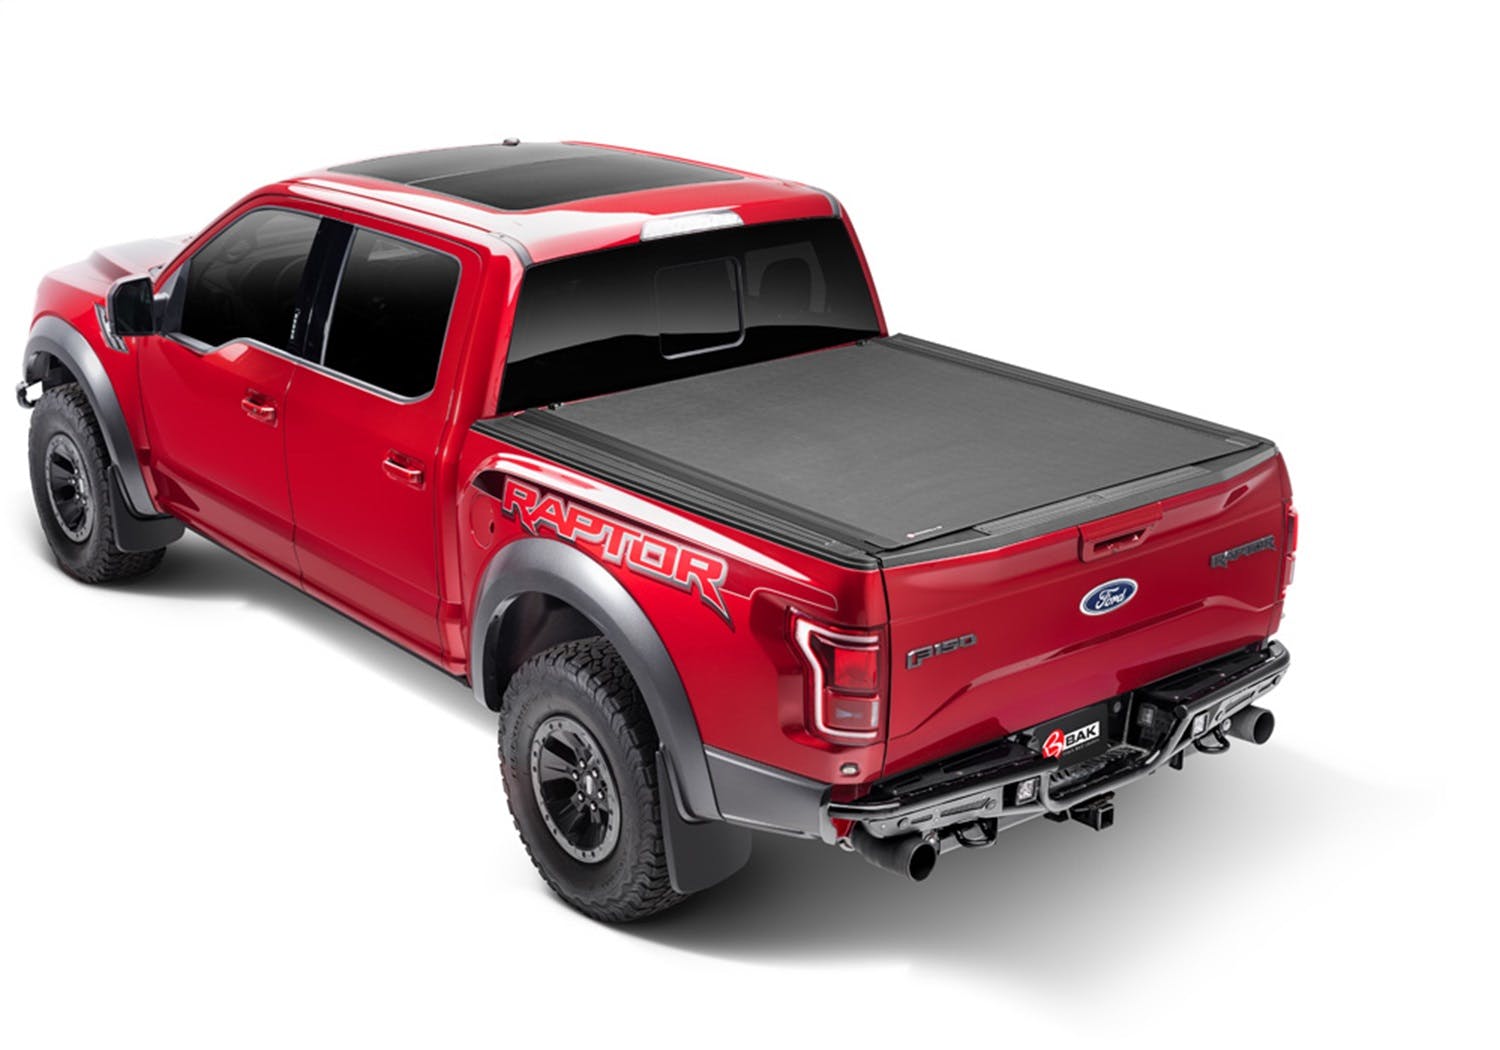 BAK Industries 80407 Revolver X4s Hard Rolling Truck Bed Cover